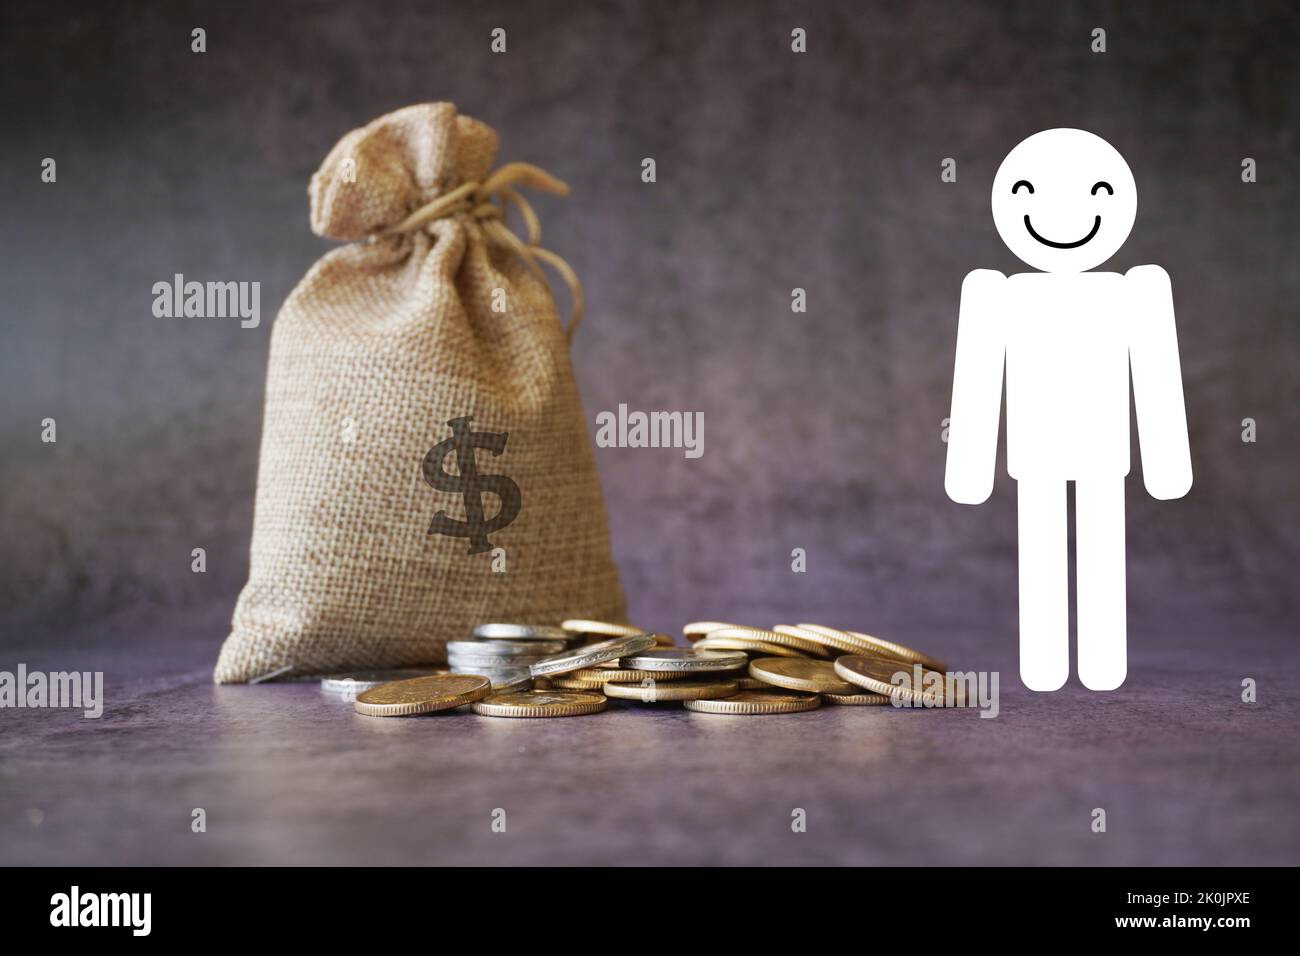 Happy man standing with money bag and coins business concept stock photo Stock Photo